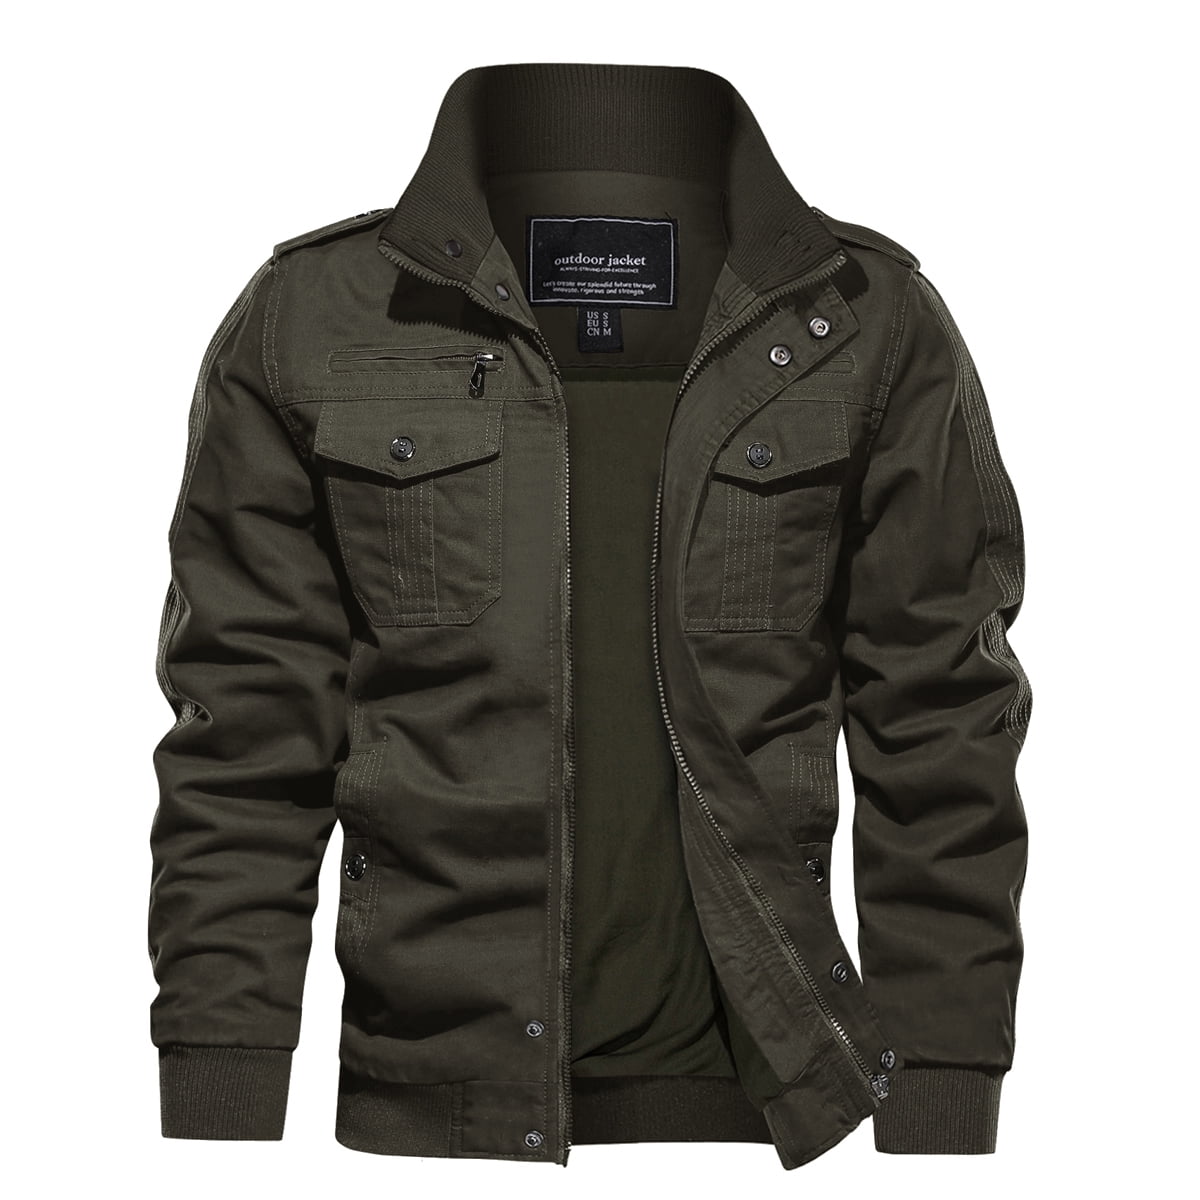 Black Stand Collar Spring and Autumn Casual Cotton Coat Mens Military Style Jacket Army green A Durable Jacket Khaki